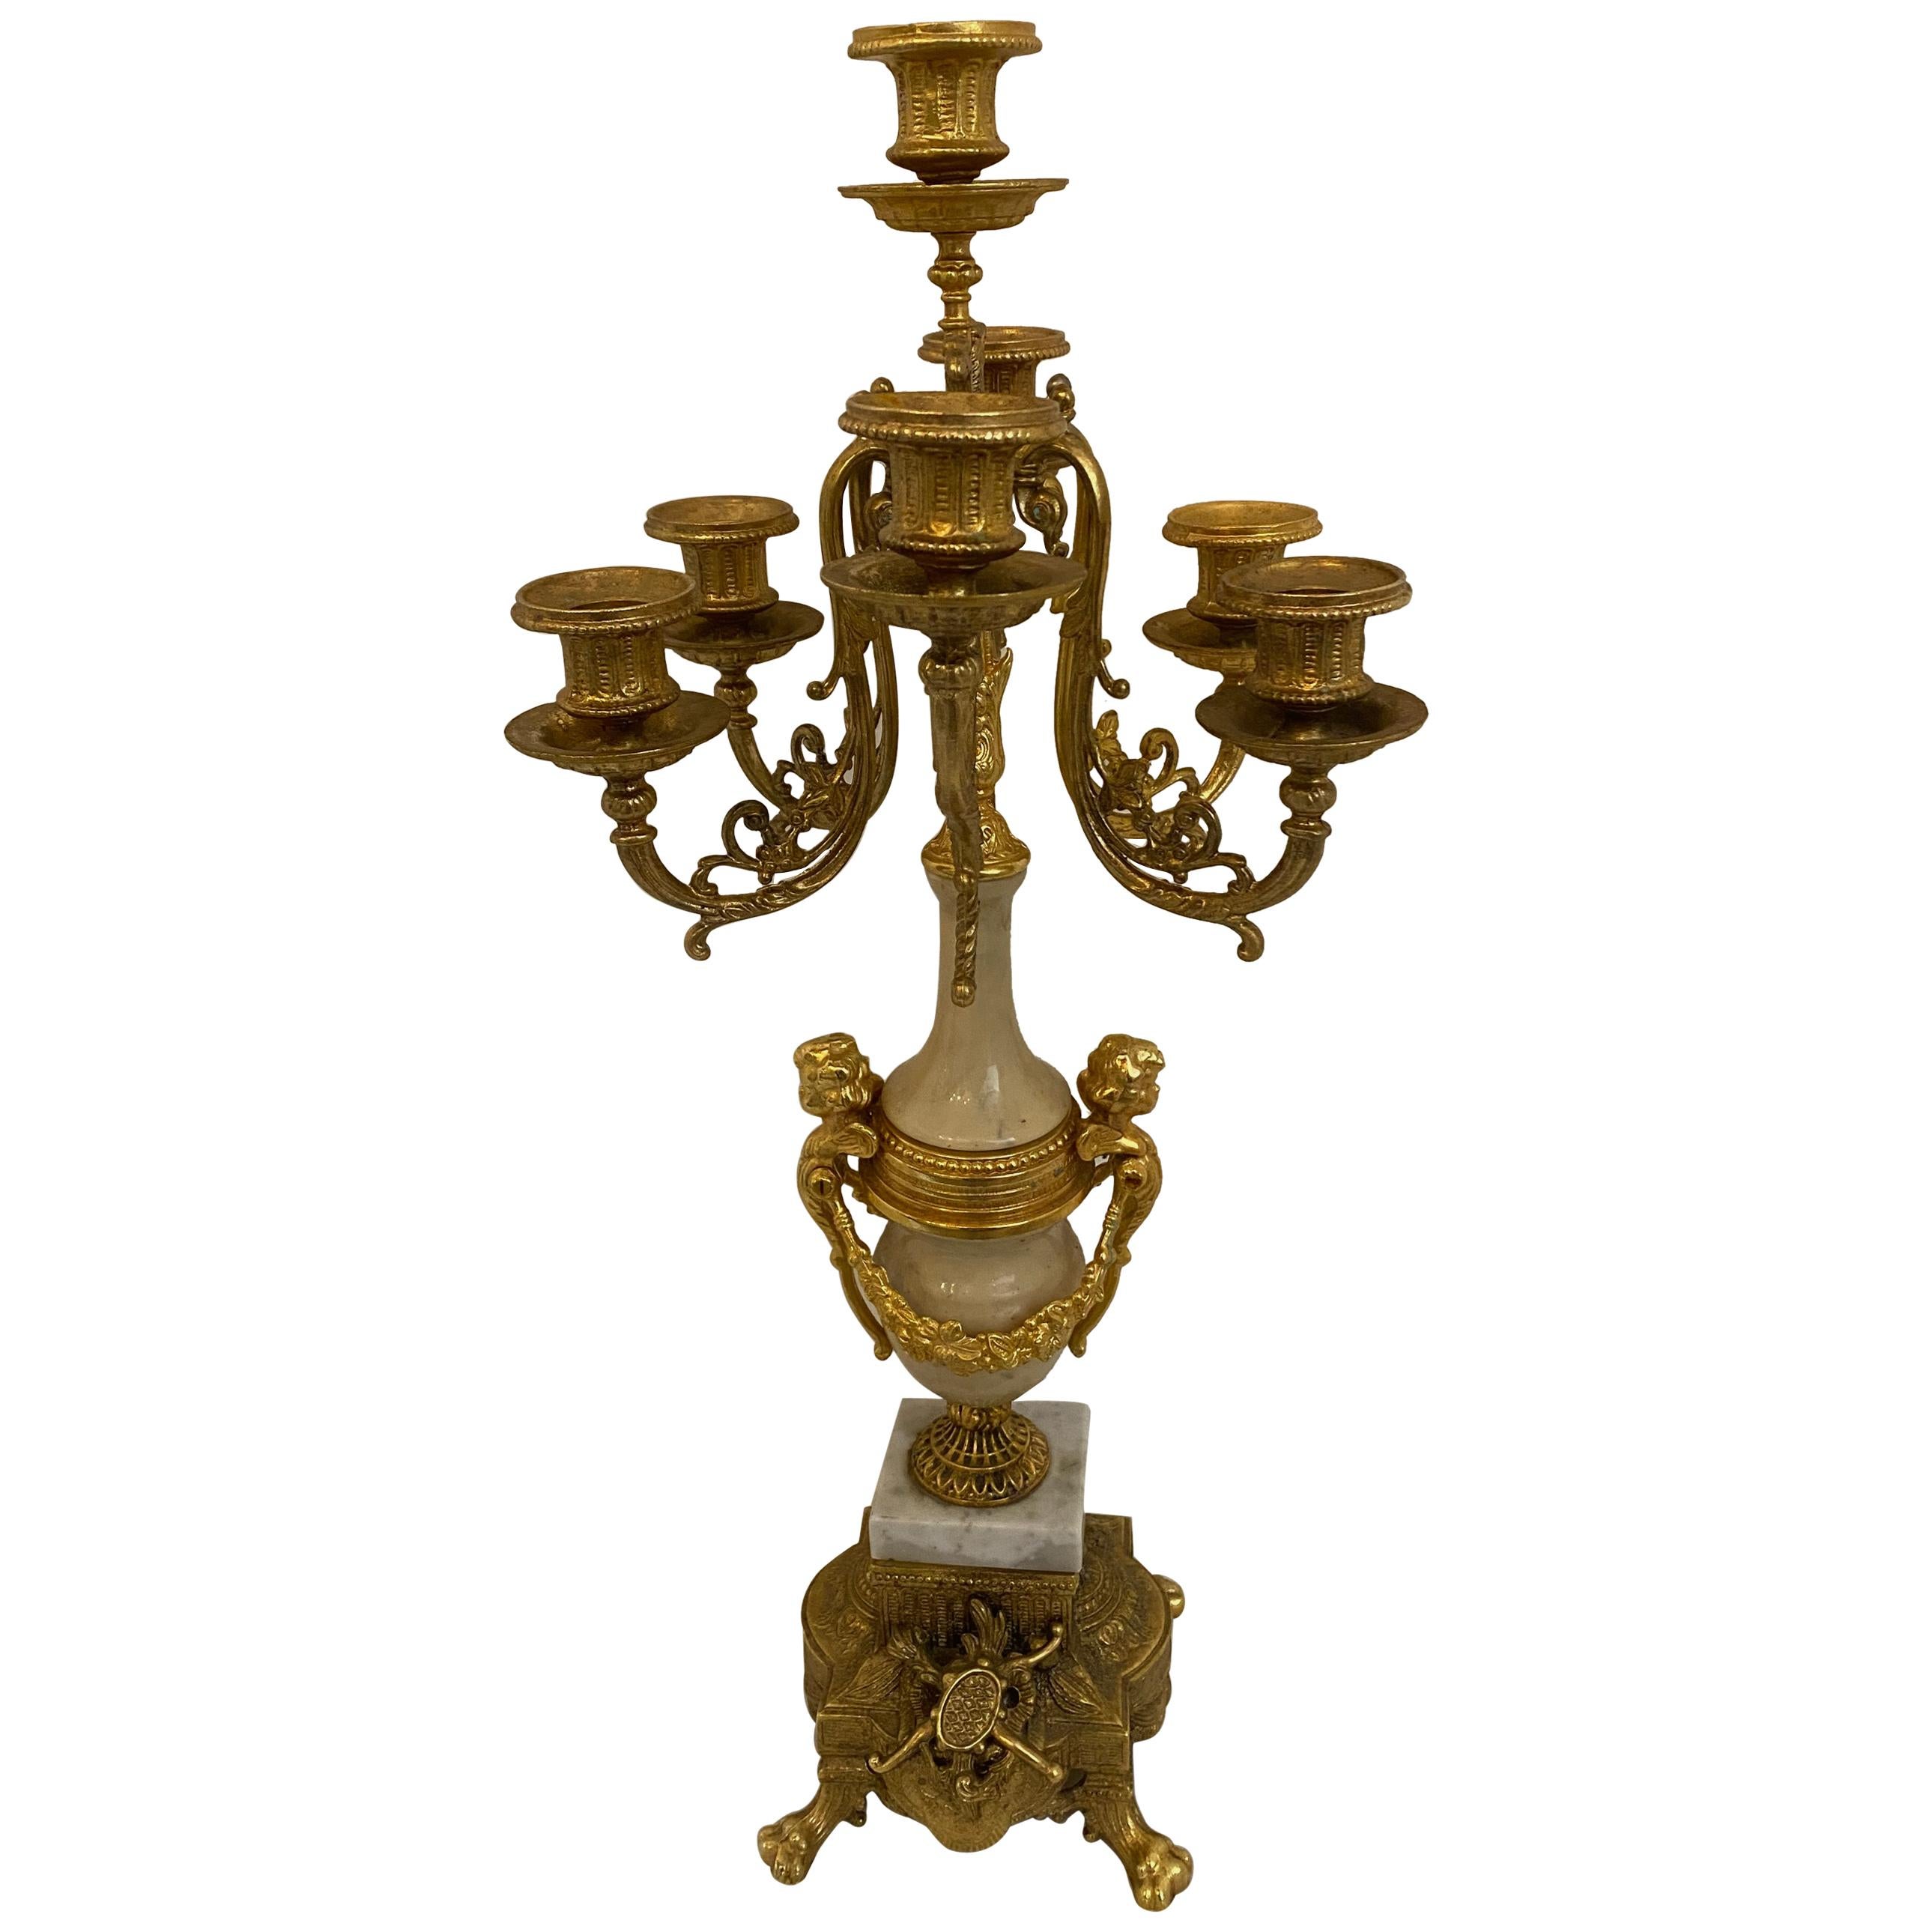 Gold-Plated Candelabra For Sale